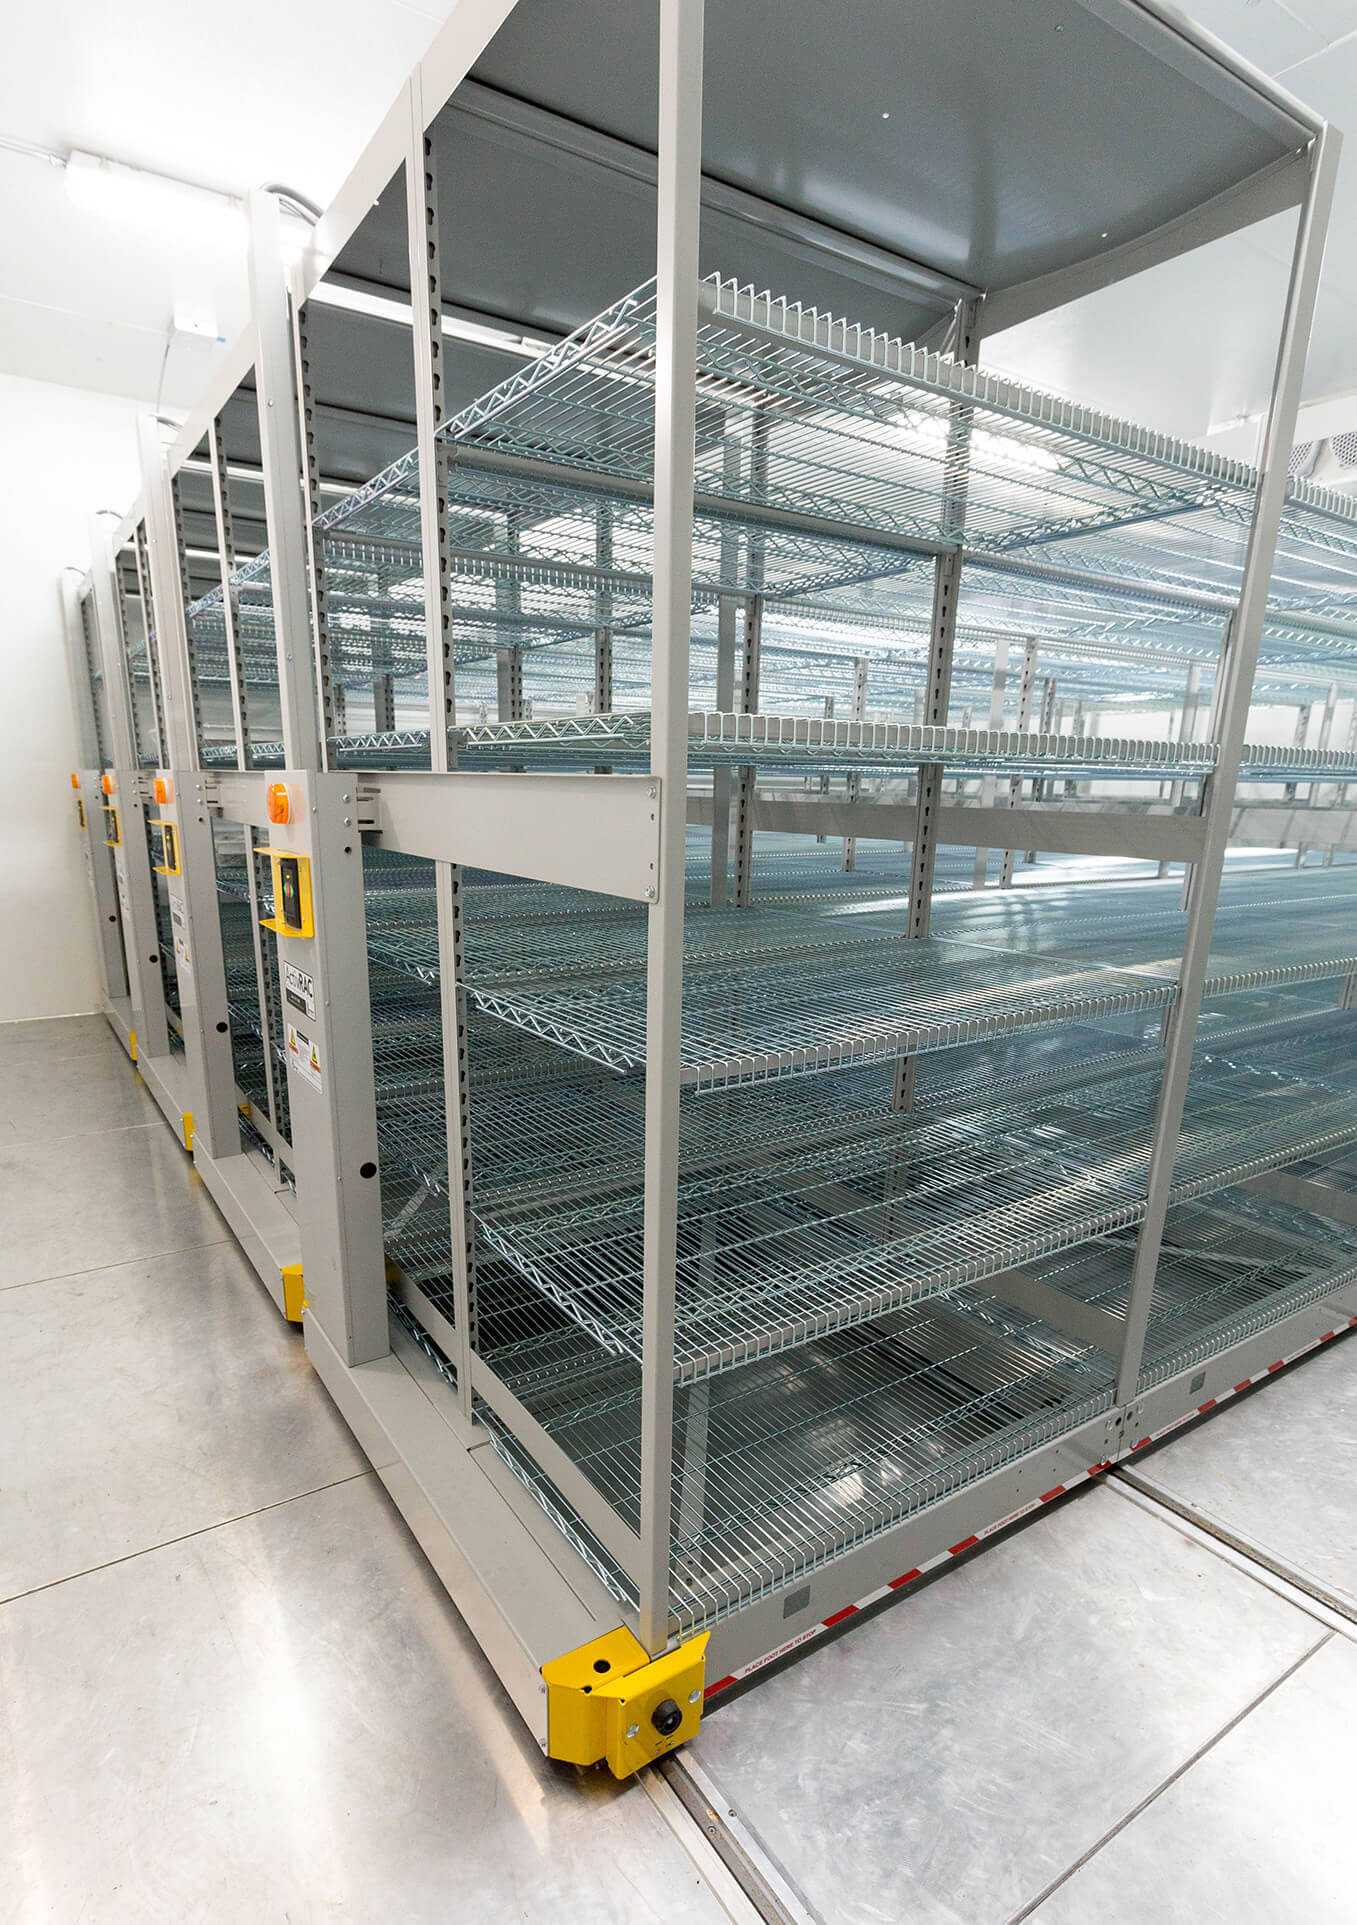 Cooler storage using wire shelving on industrial mobile racking for pharmaceutical company